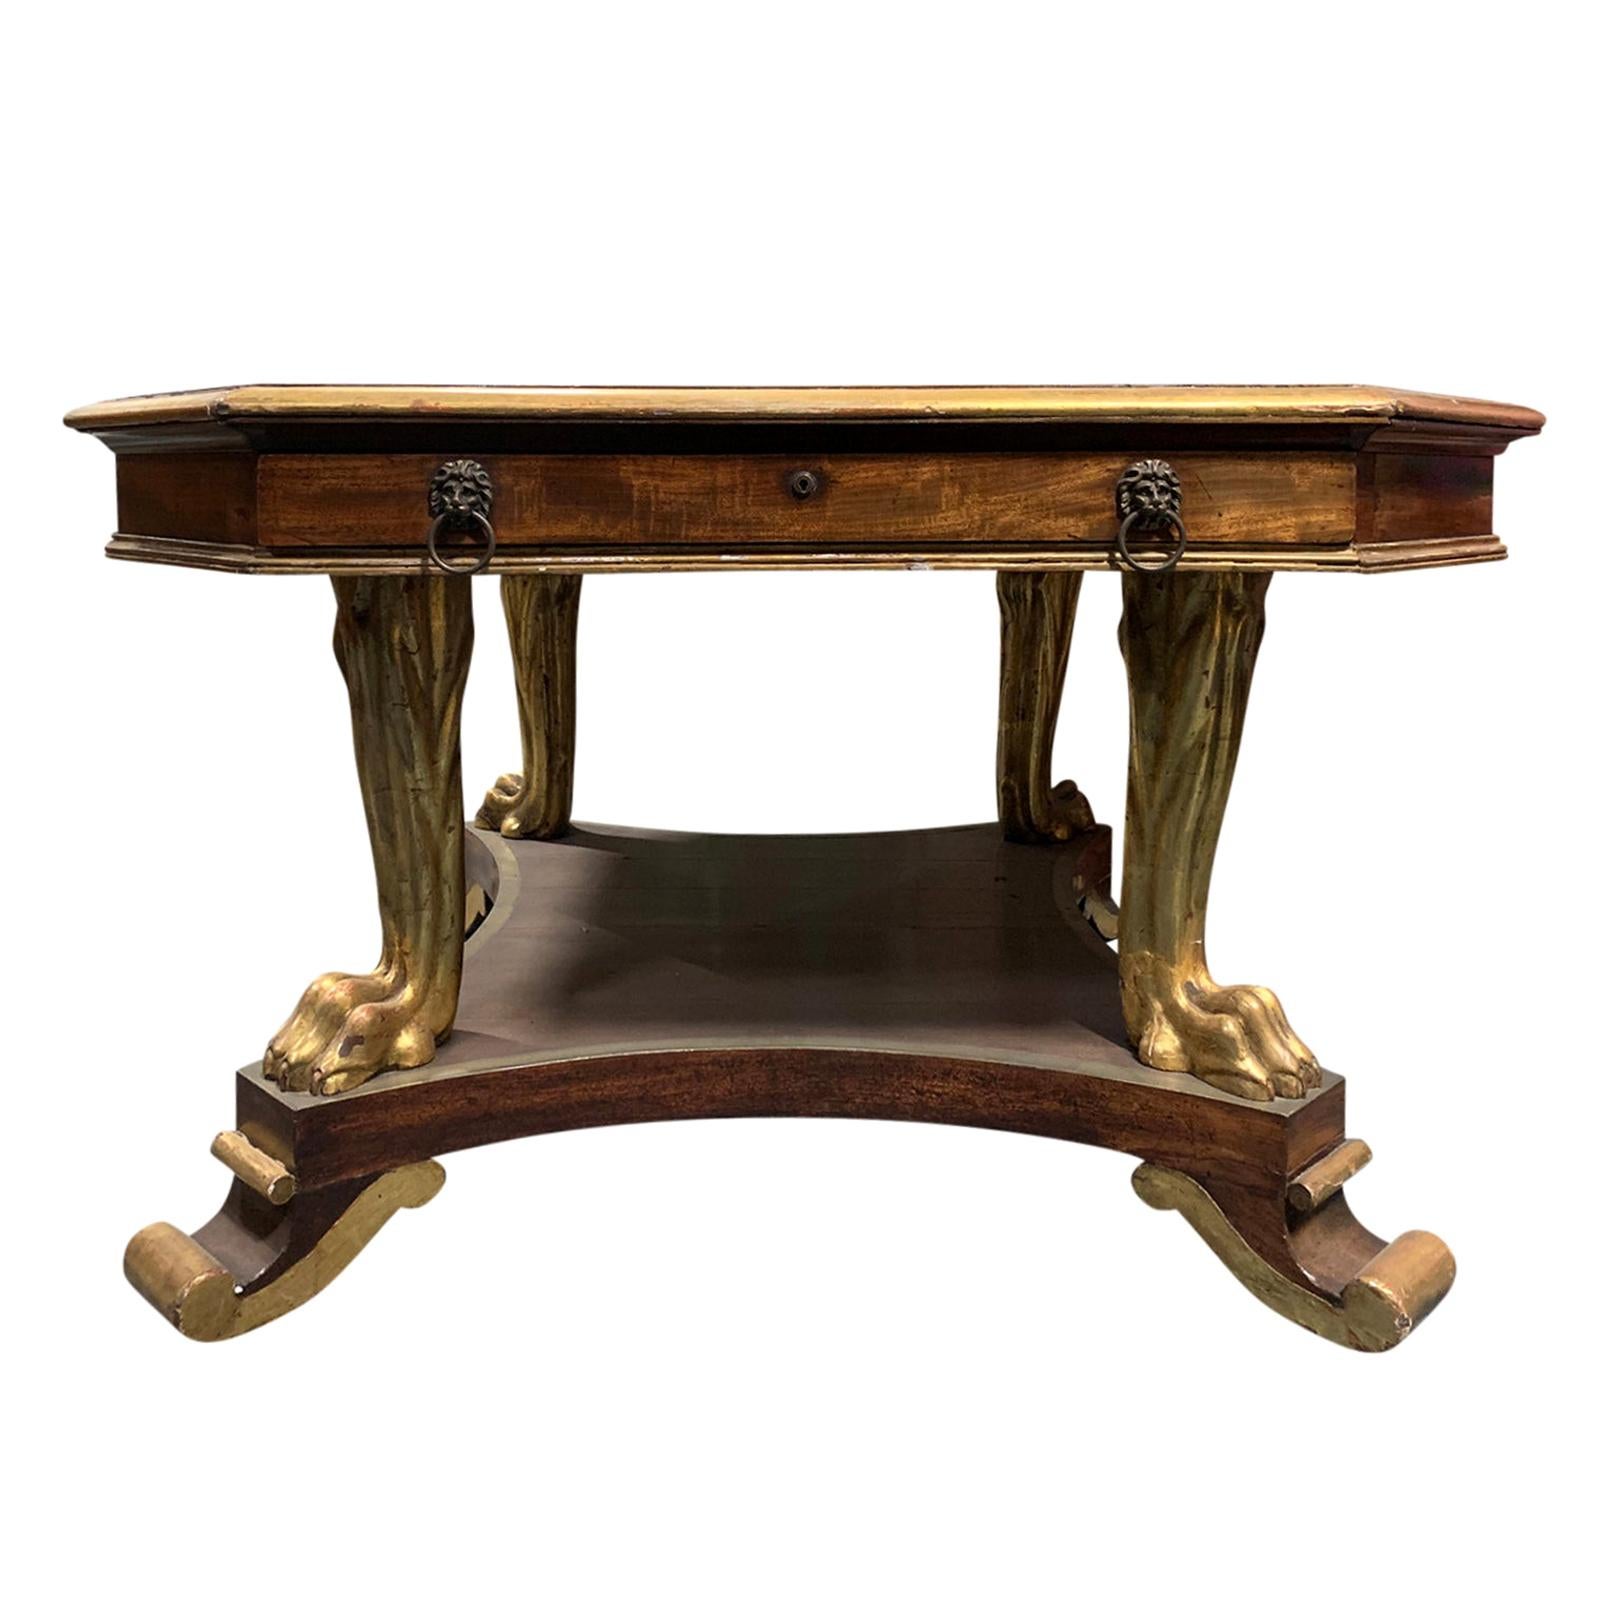 English George IV Mahogany and Parcel Gilt Center or Library Table, circa 1840